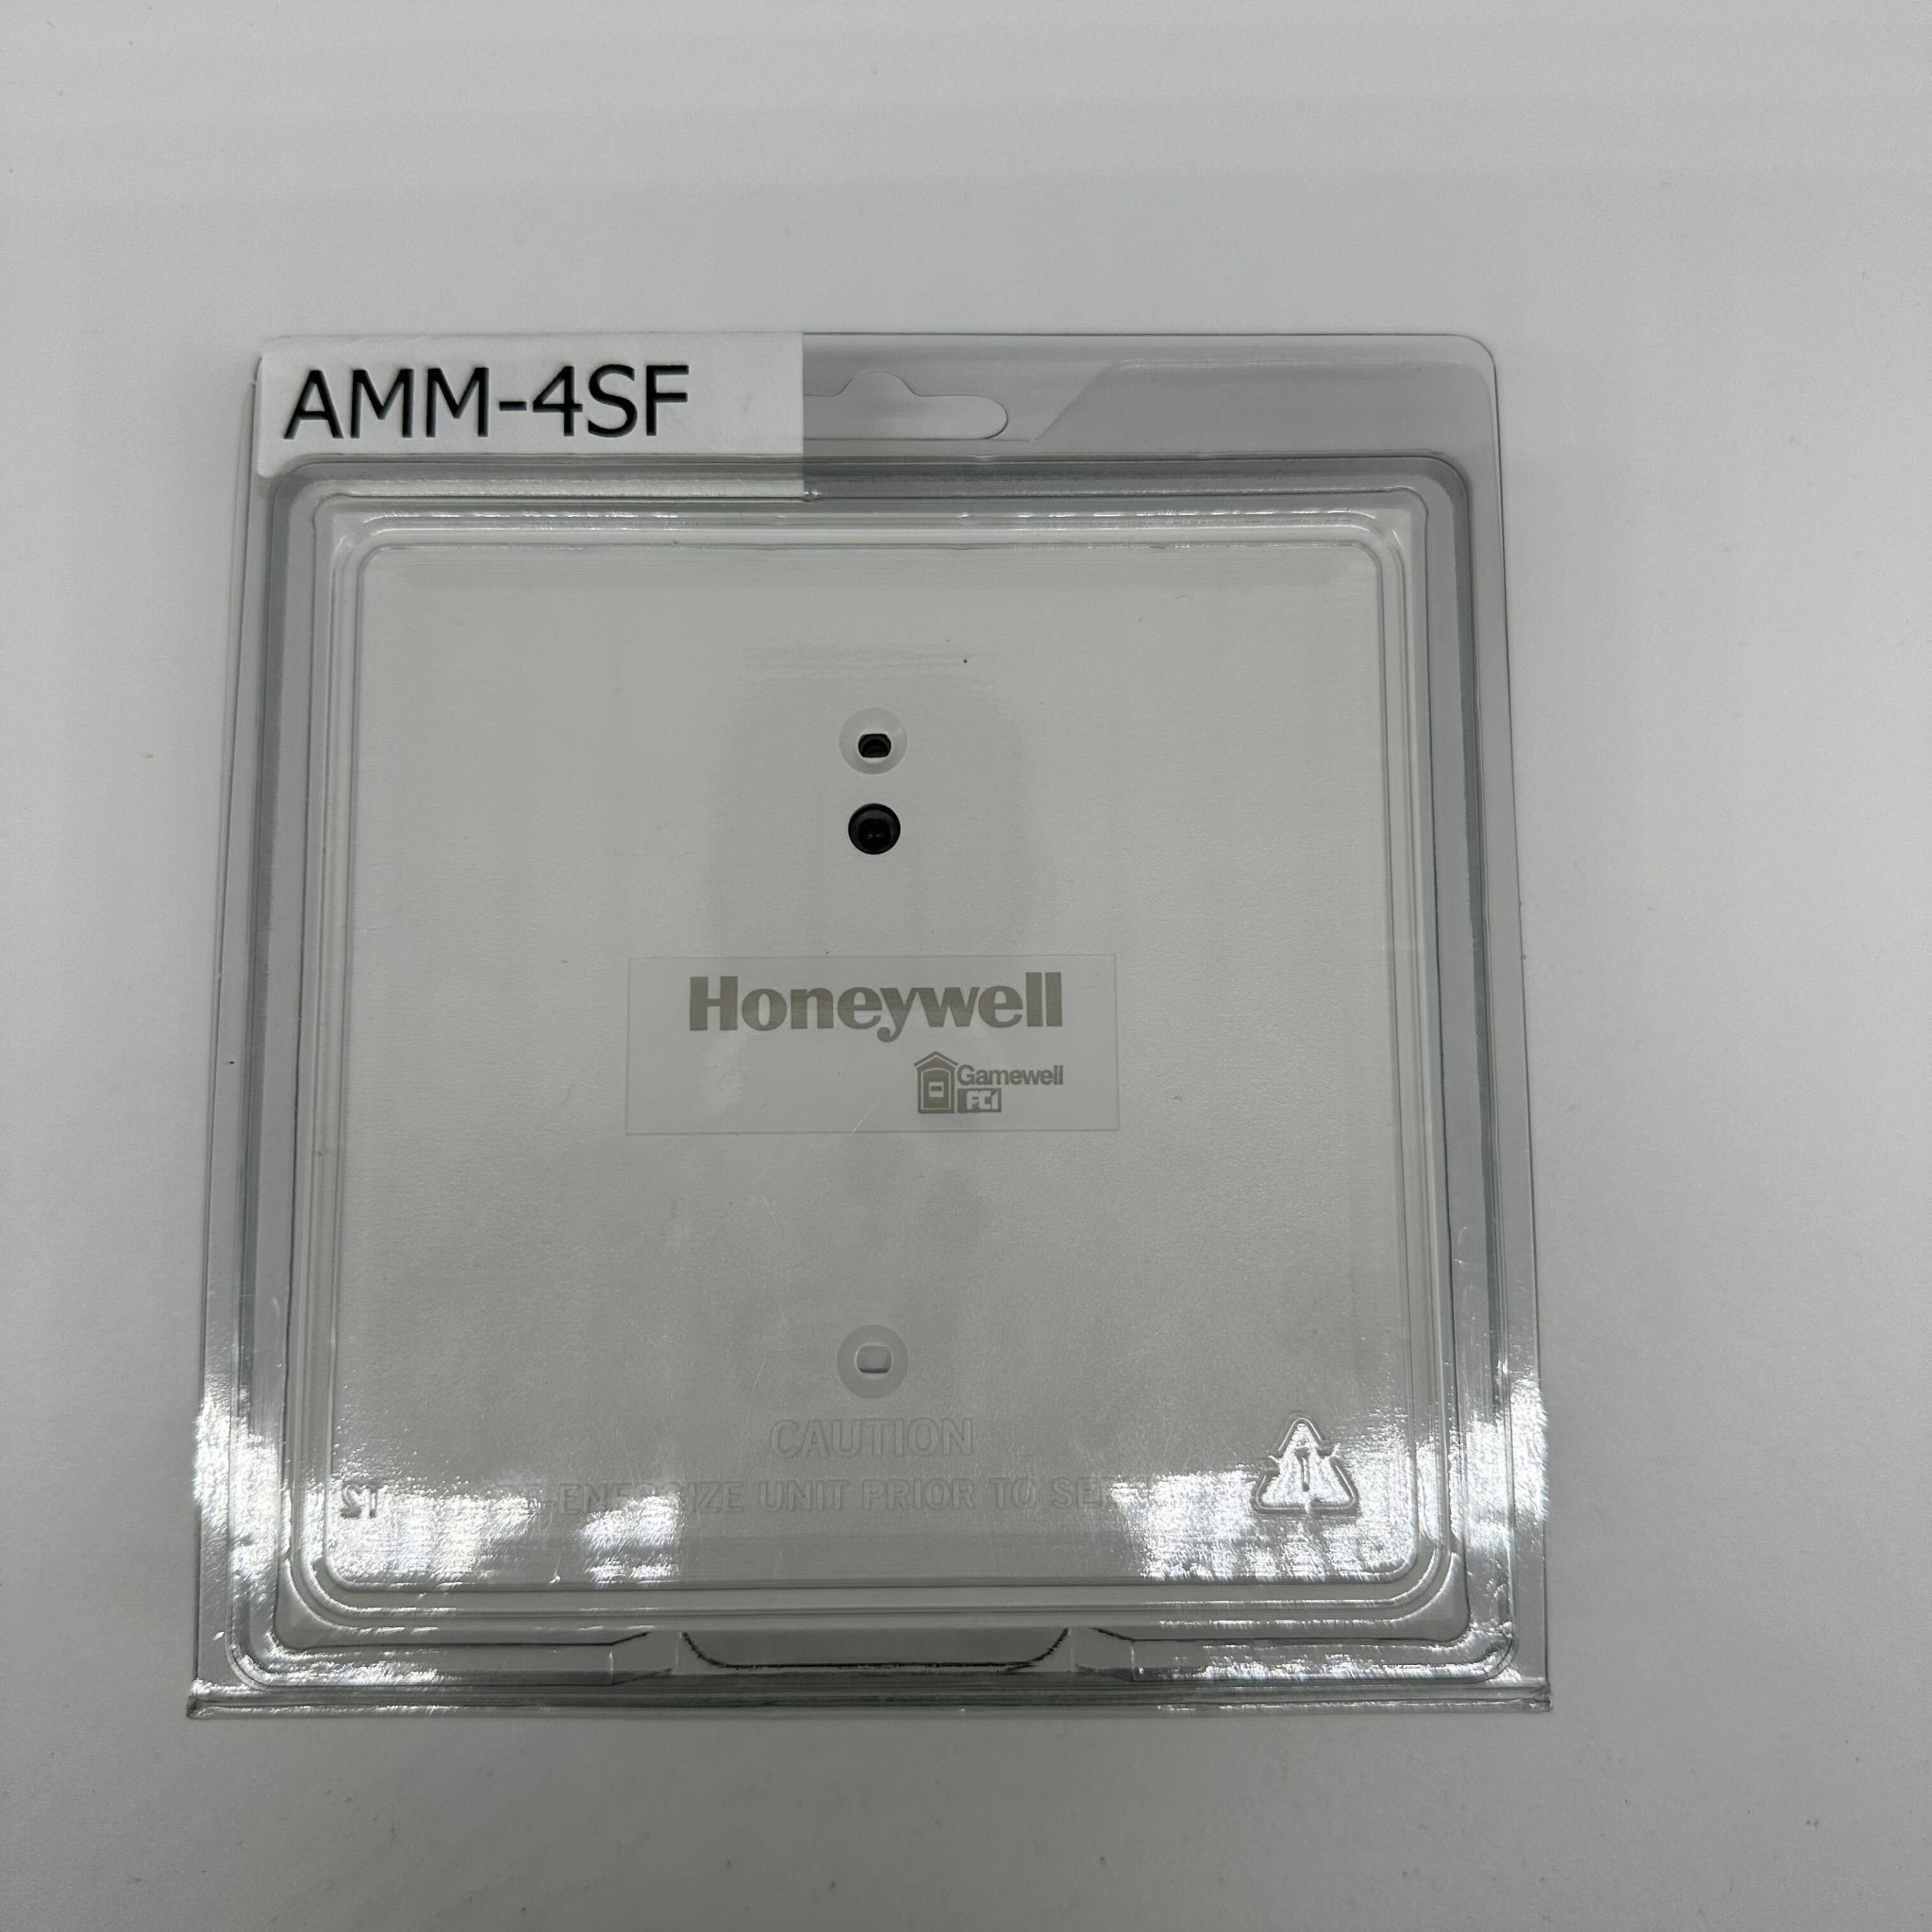 Gamewell-FCI AMM-4SF - The Fire Alarm Supplier